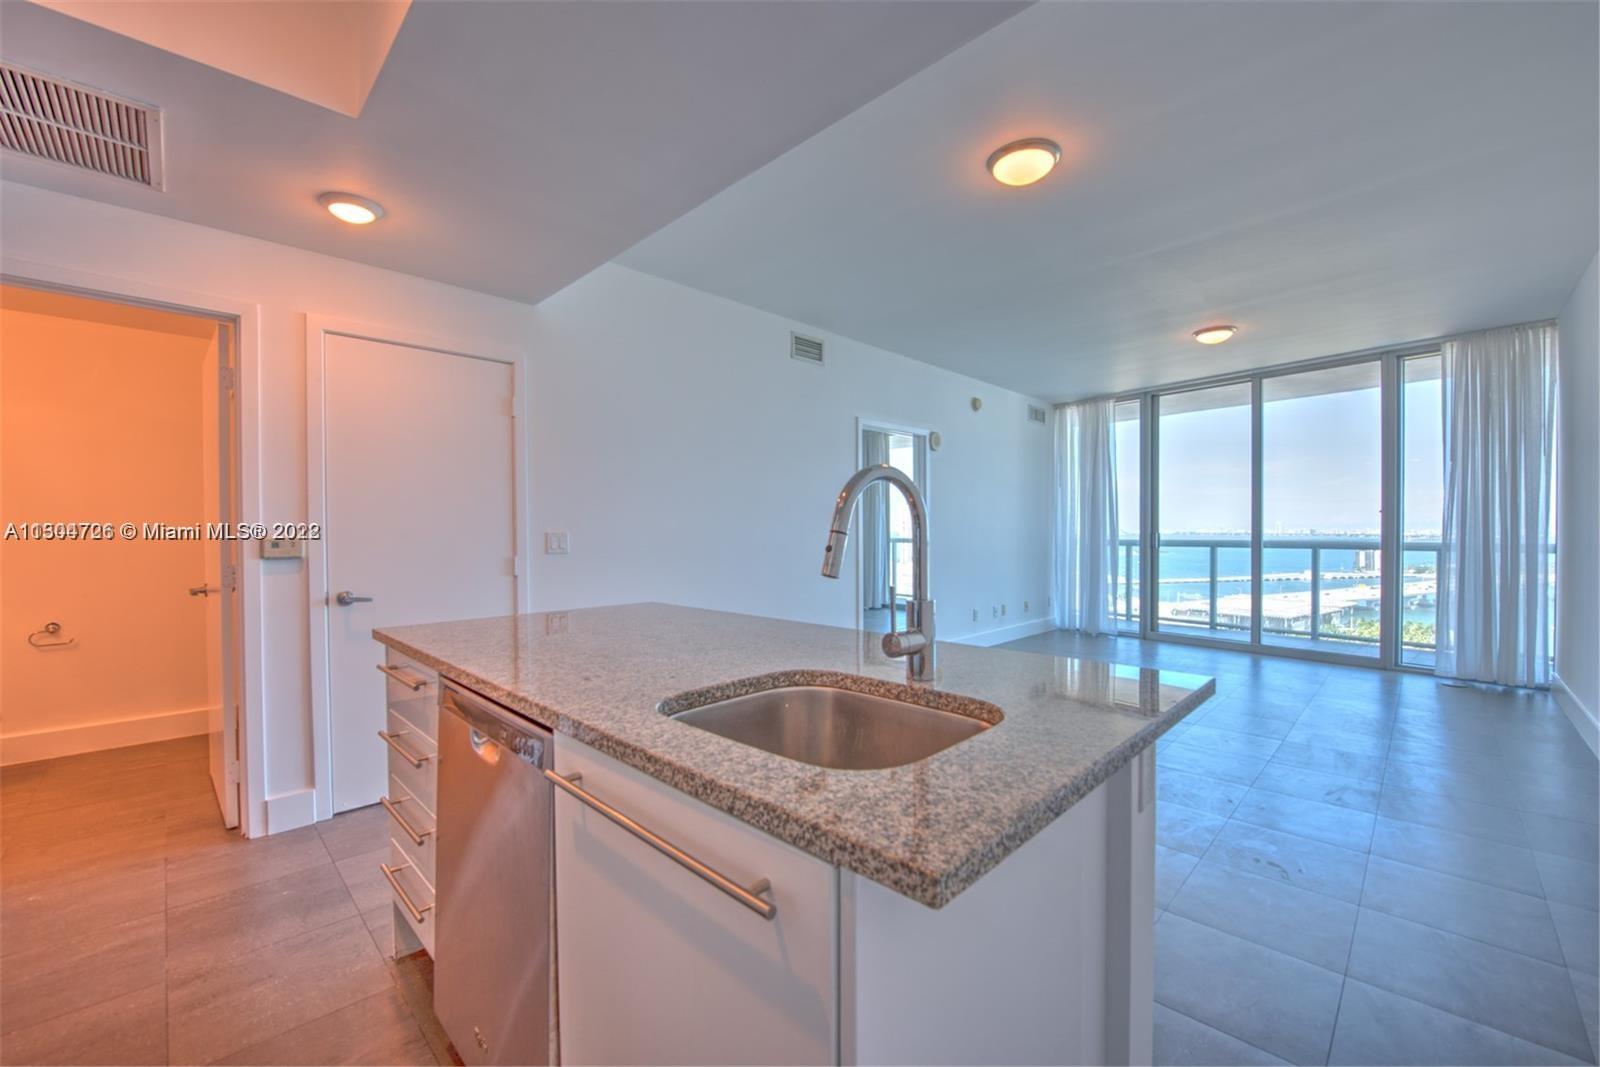 Beautiful 1 Bed/1.5 Bath condo at Marina Blue w/ 845 interior square feet, beautiful with a wooden floor (Brasilian Teak) flooring throughout, walk-in closet w/ built-in cabinets, stainless steel appliances, washer/dryer, spacious balcony, and 9-foot high ceilings with floor-to-ceiling glass windows offering breathtaking views of Biscayne Bay, Museum Park, Miami Beach skyline, and cruise ships. Rent price includes basic cable TV, water, and 1 assigned parking space. Building amenities: two swimming pools (sunset & sunrise), hot tub, fitness center, sand volleyball court, 24-hour concierge, valet parking, business center, and party room.